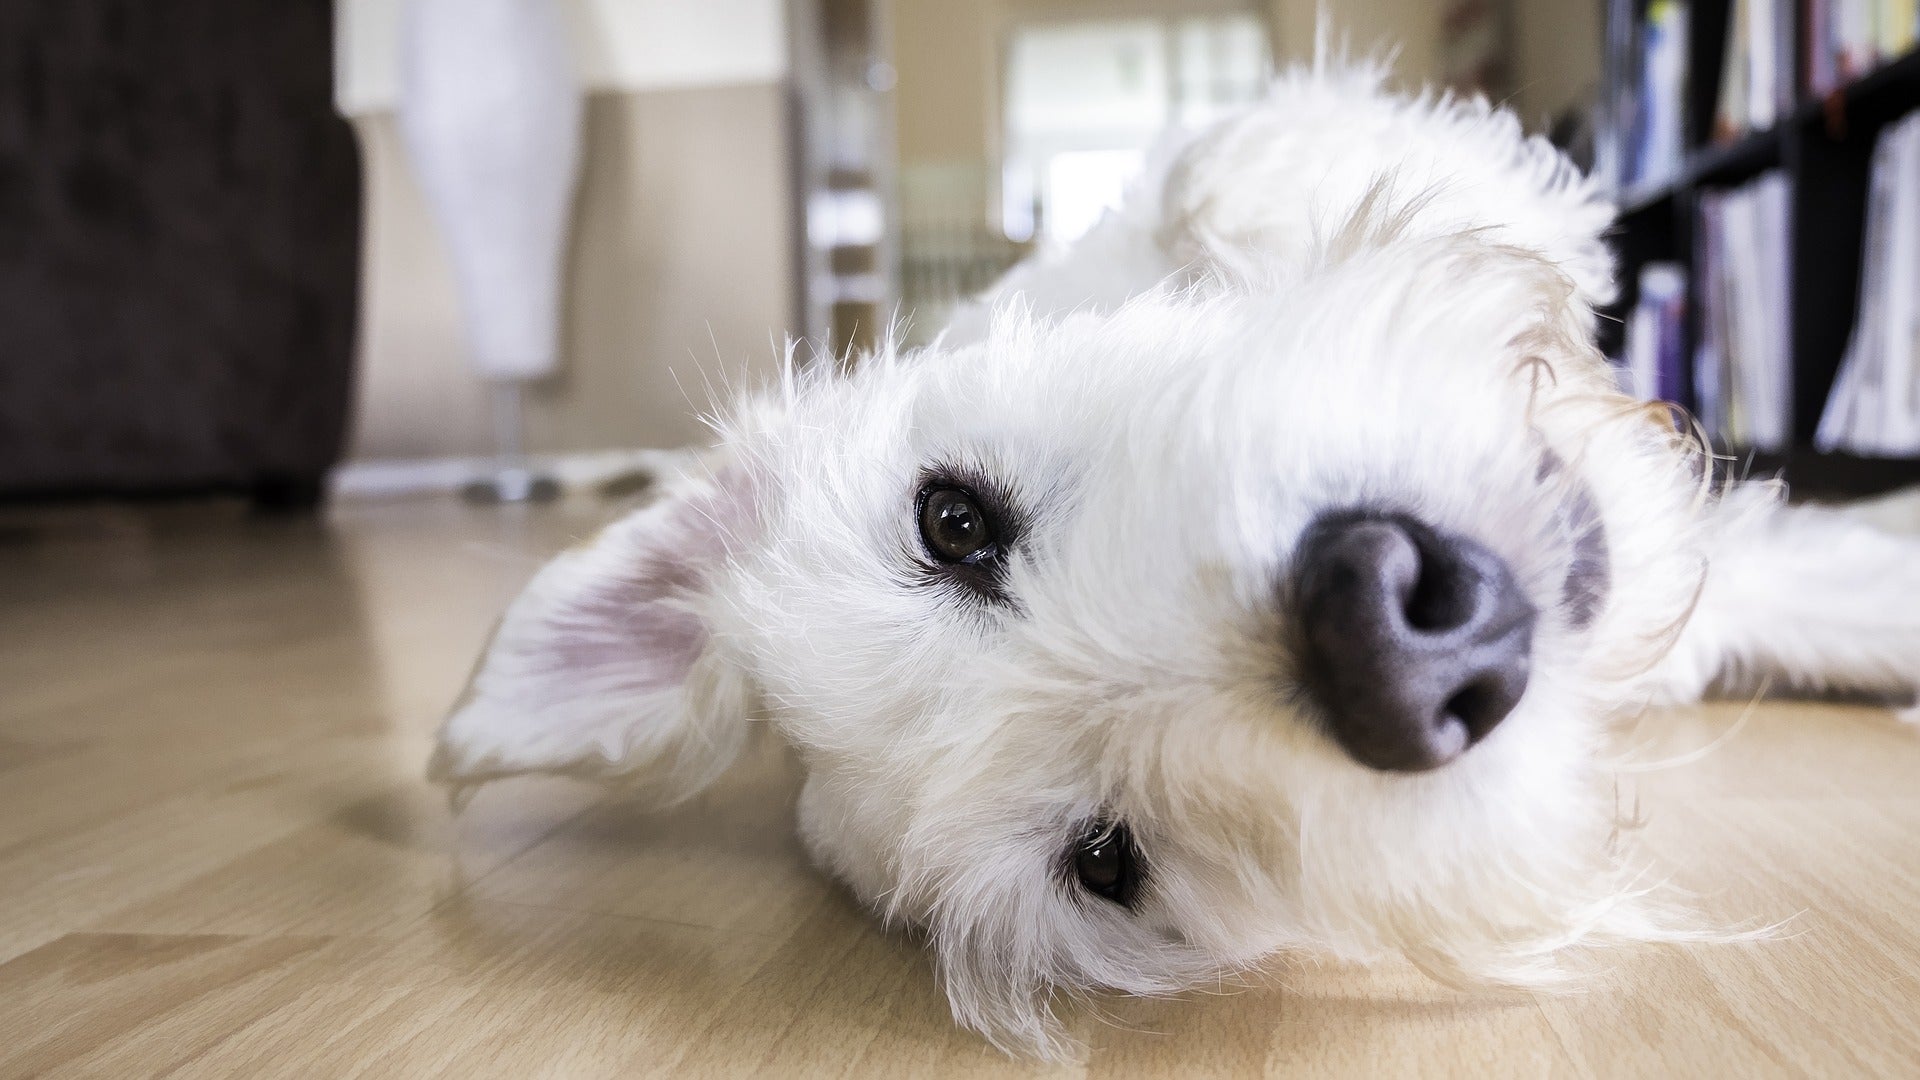 7 Types of Flooring for Dogs That Pee